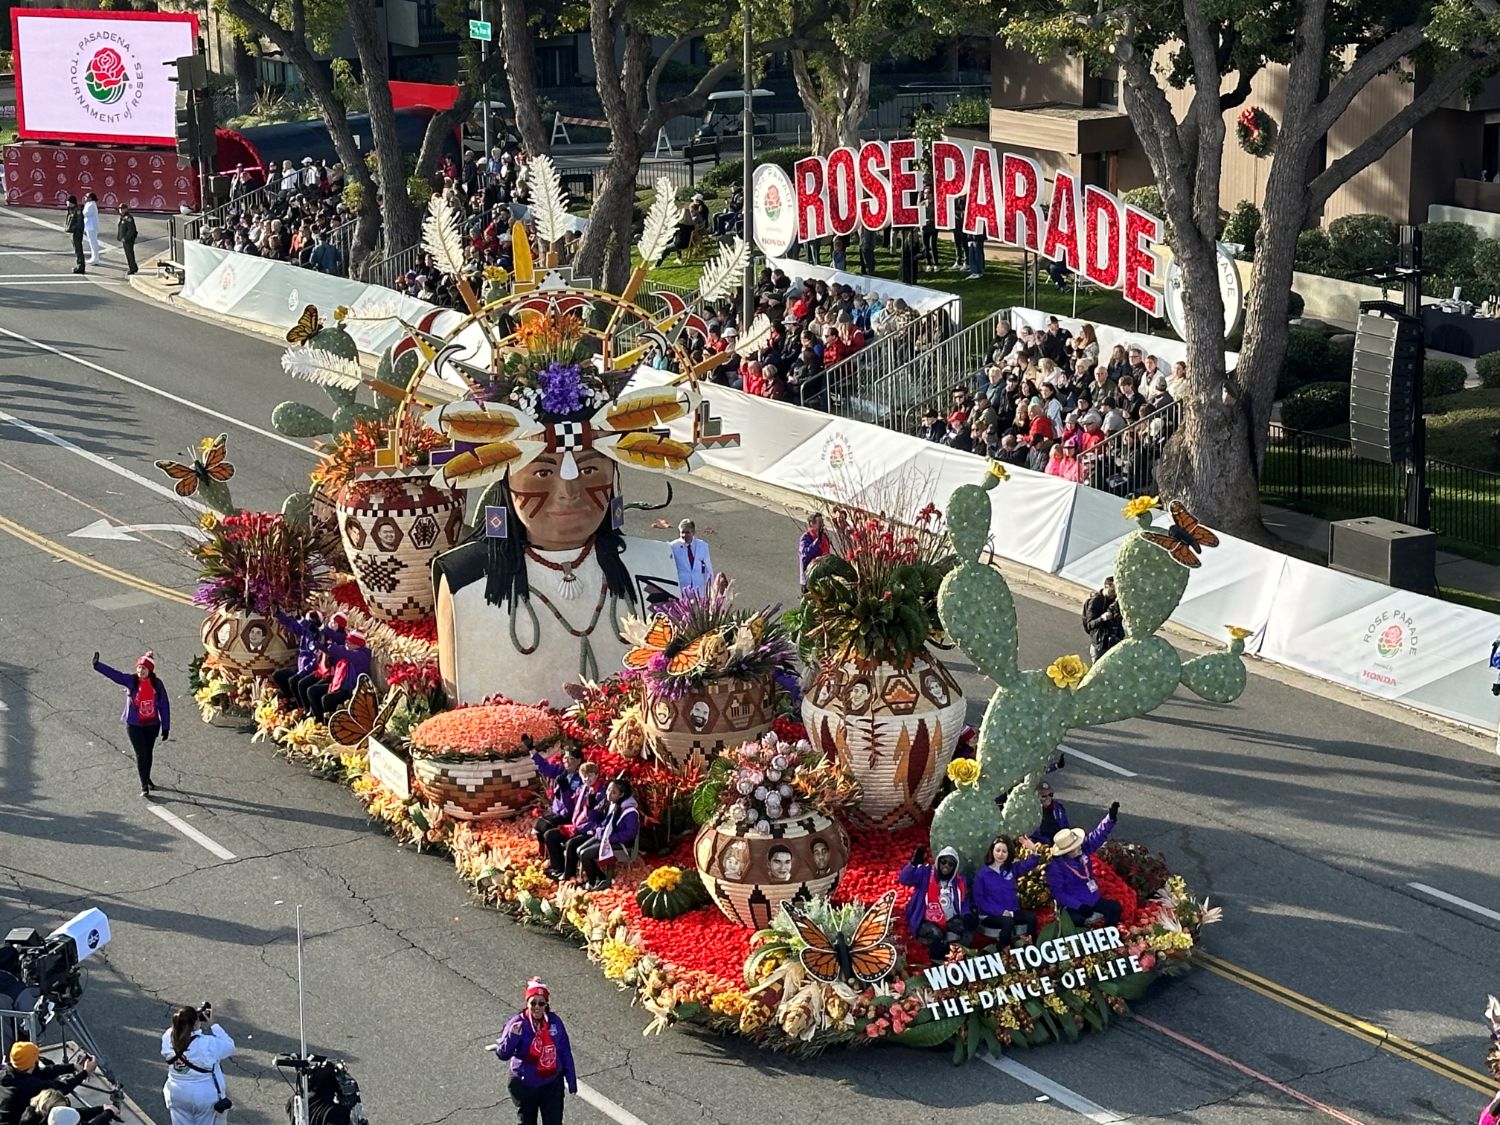 PHOTO: Bill Glazier | The South Pasadenan | The Judges Award went to Onelegacy Donate Life for outstanding float design and dramatic impact. It was named “Woven Together – the Dance of Life".